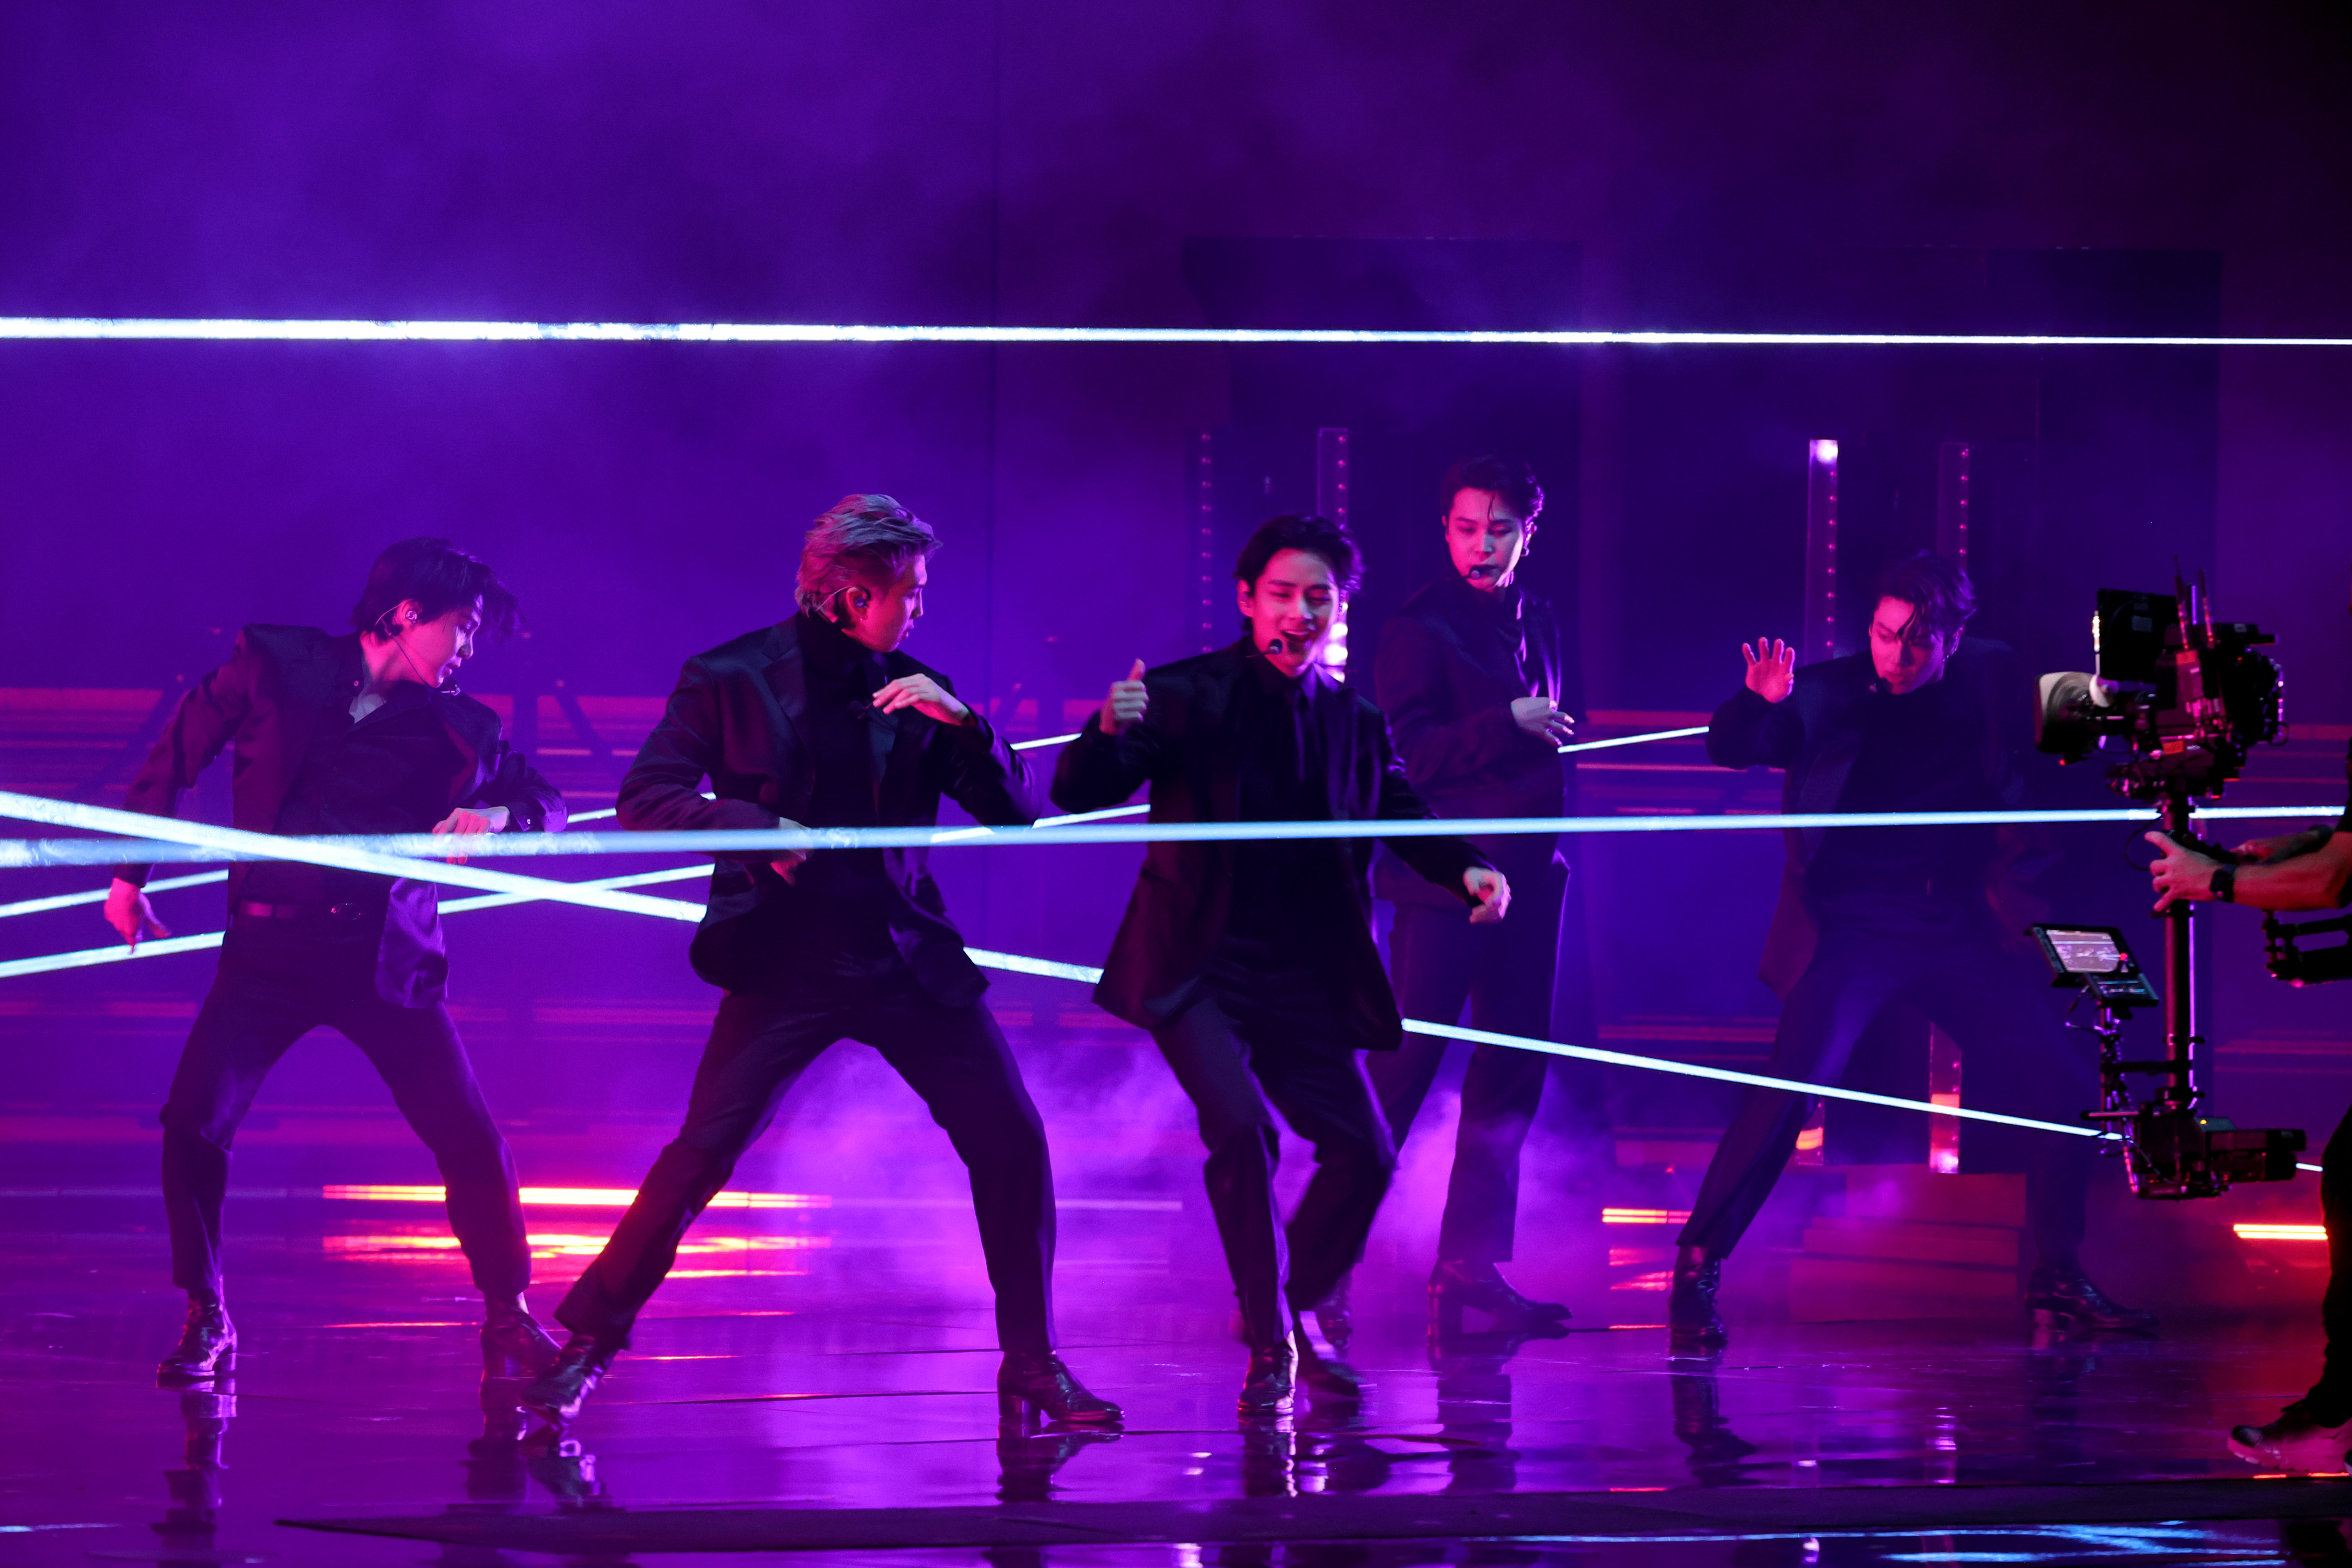 Suga, RM, V, Jimin, and Jungkook of BTS perform during the 64th Annual GRAMMY Awards